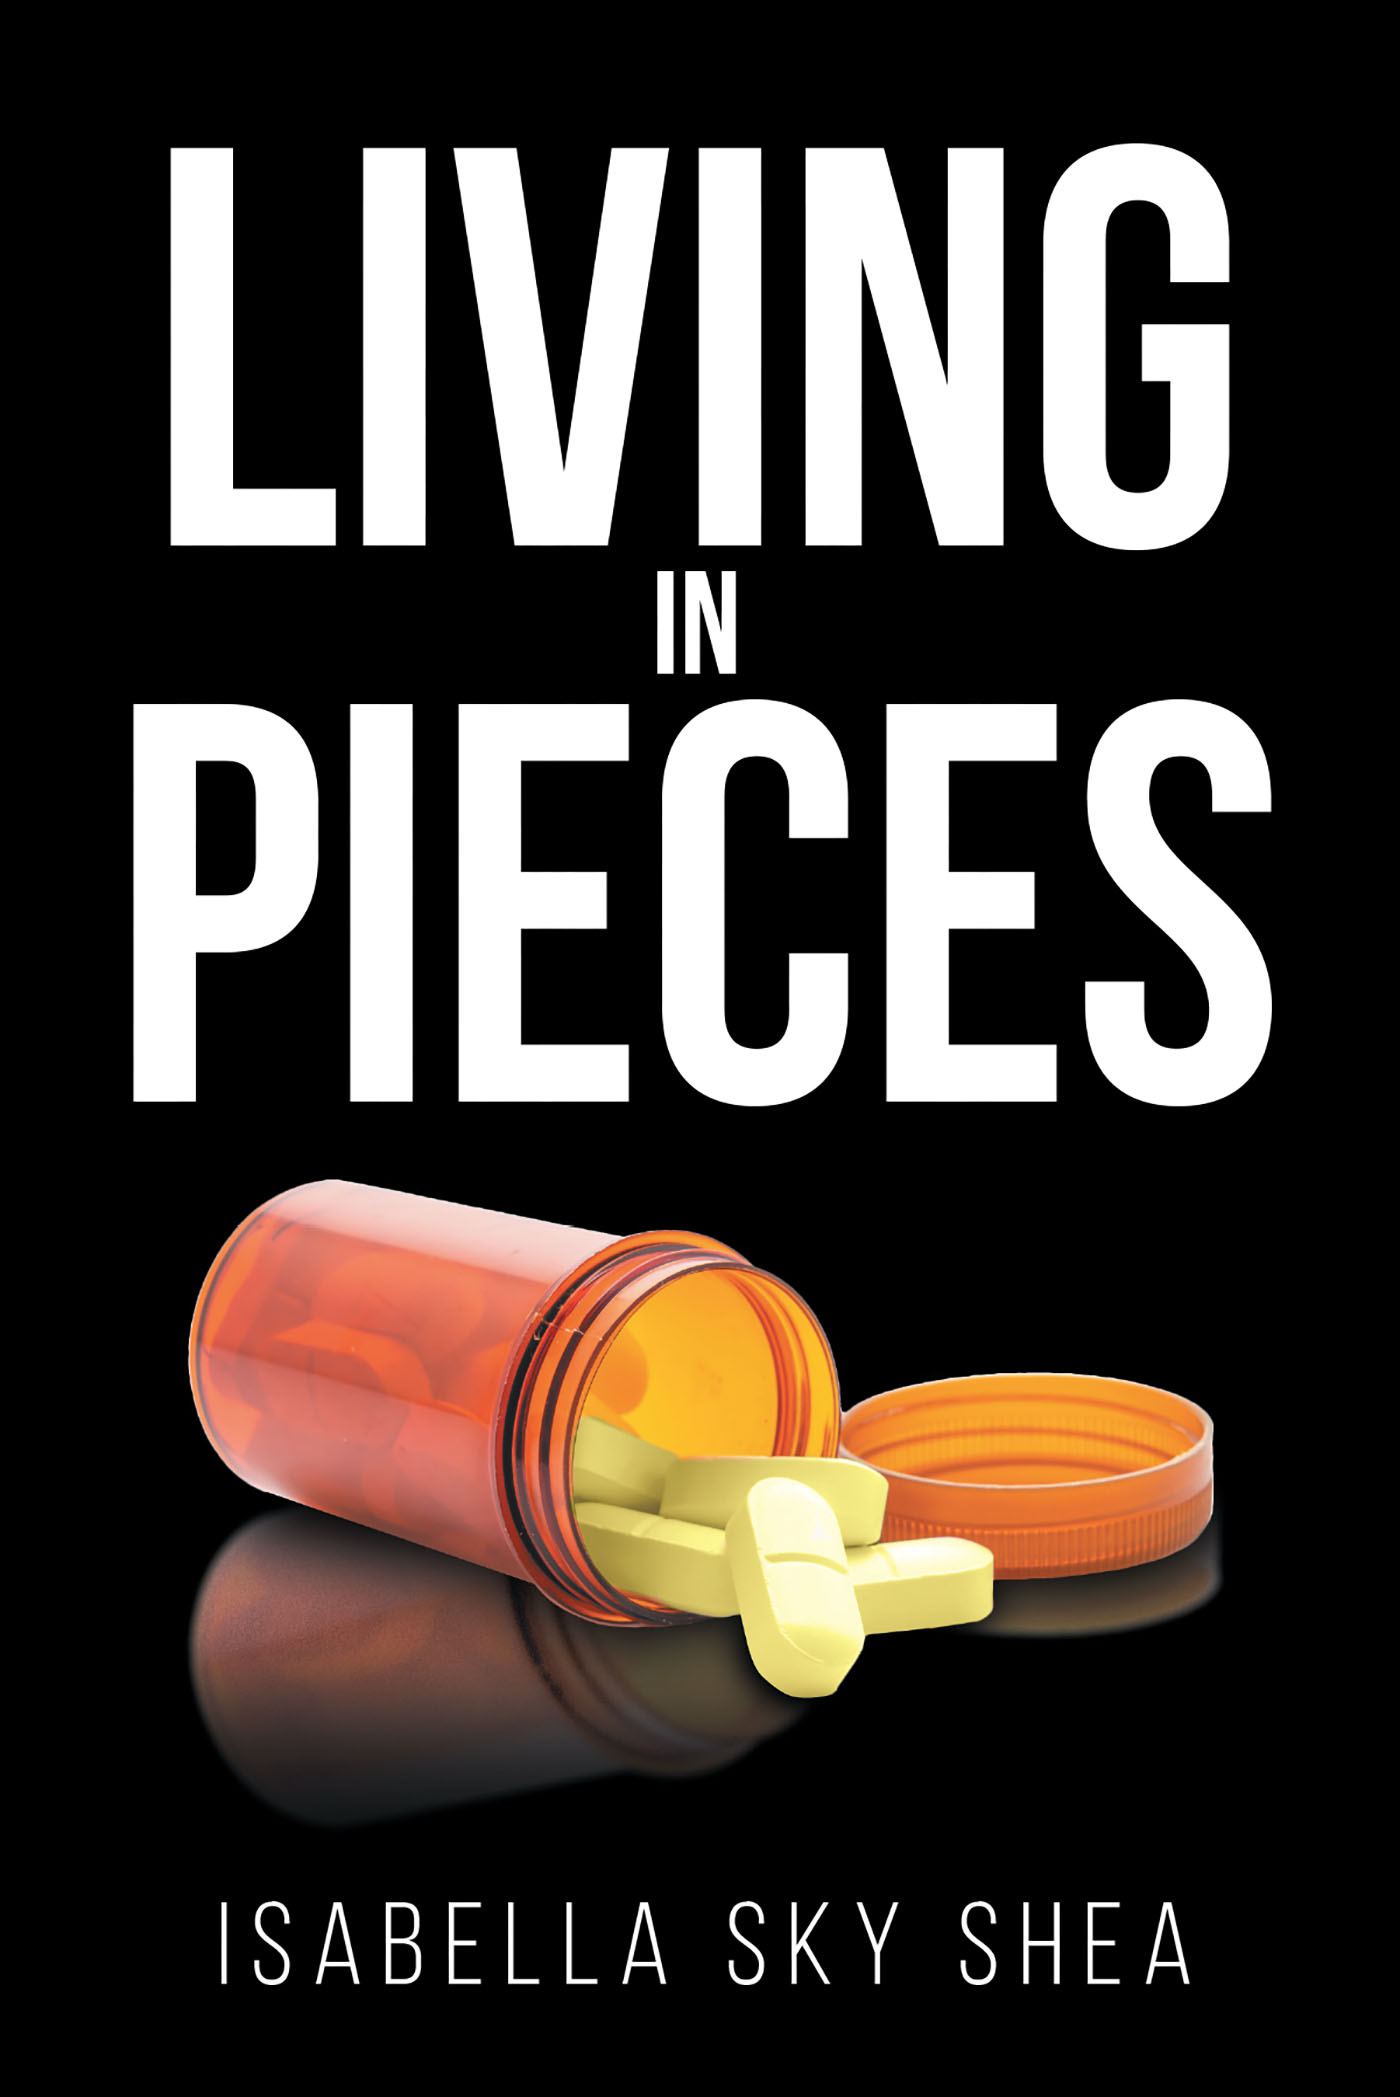 Isabella Sky Shea’s New Book, "Living in Pieces," is a Collection of Poems Written by the Author While Struggling with Mental Health Issues During the Covid-19 Pandemic